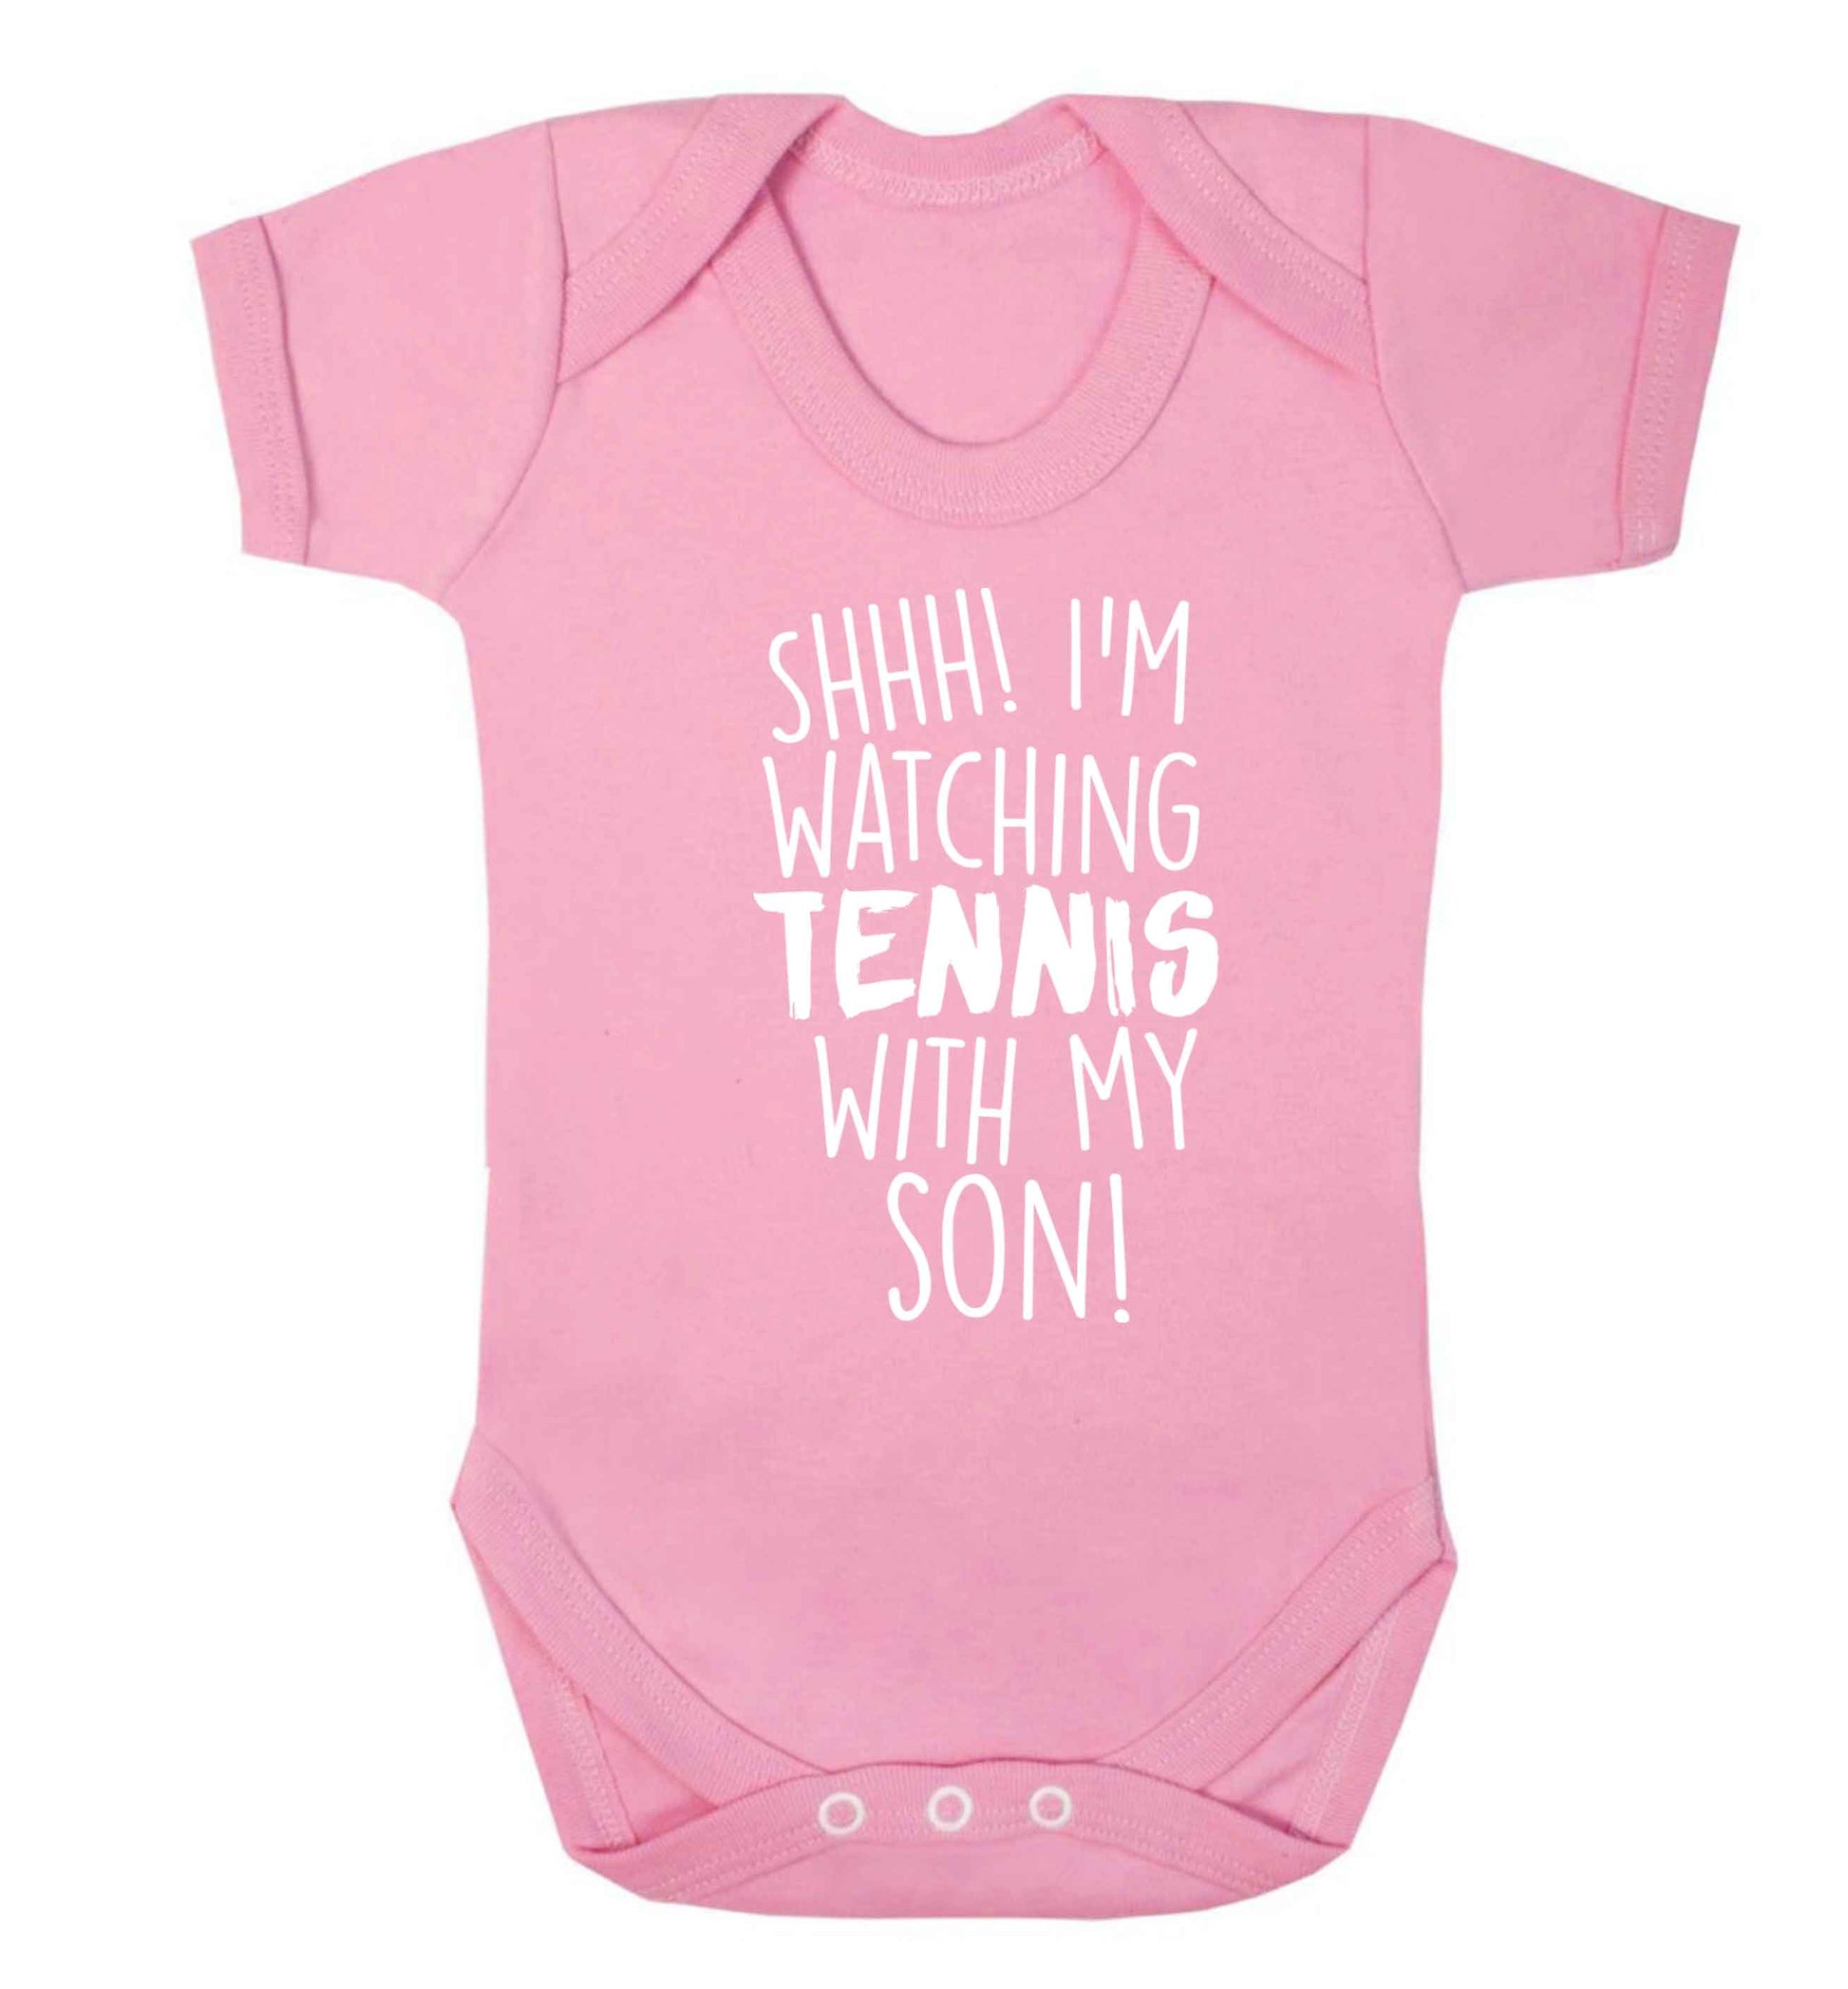 Shh! I'm watching tennis with my son! Baby Vest pale pink 18-24 months